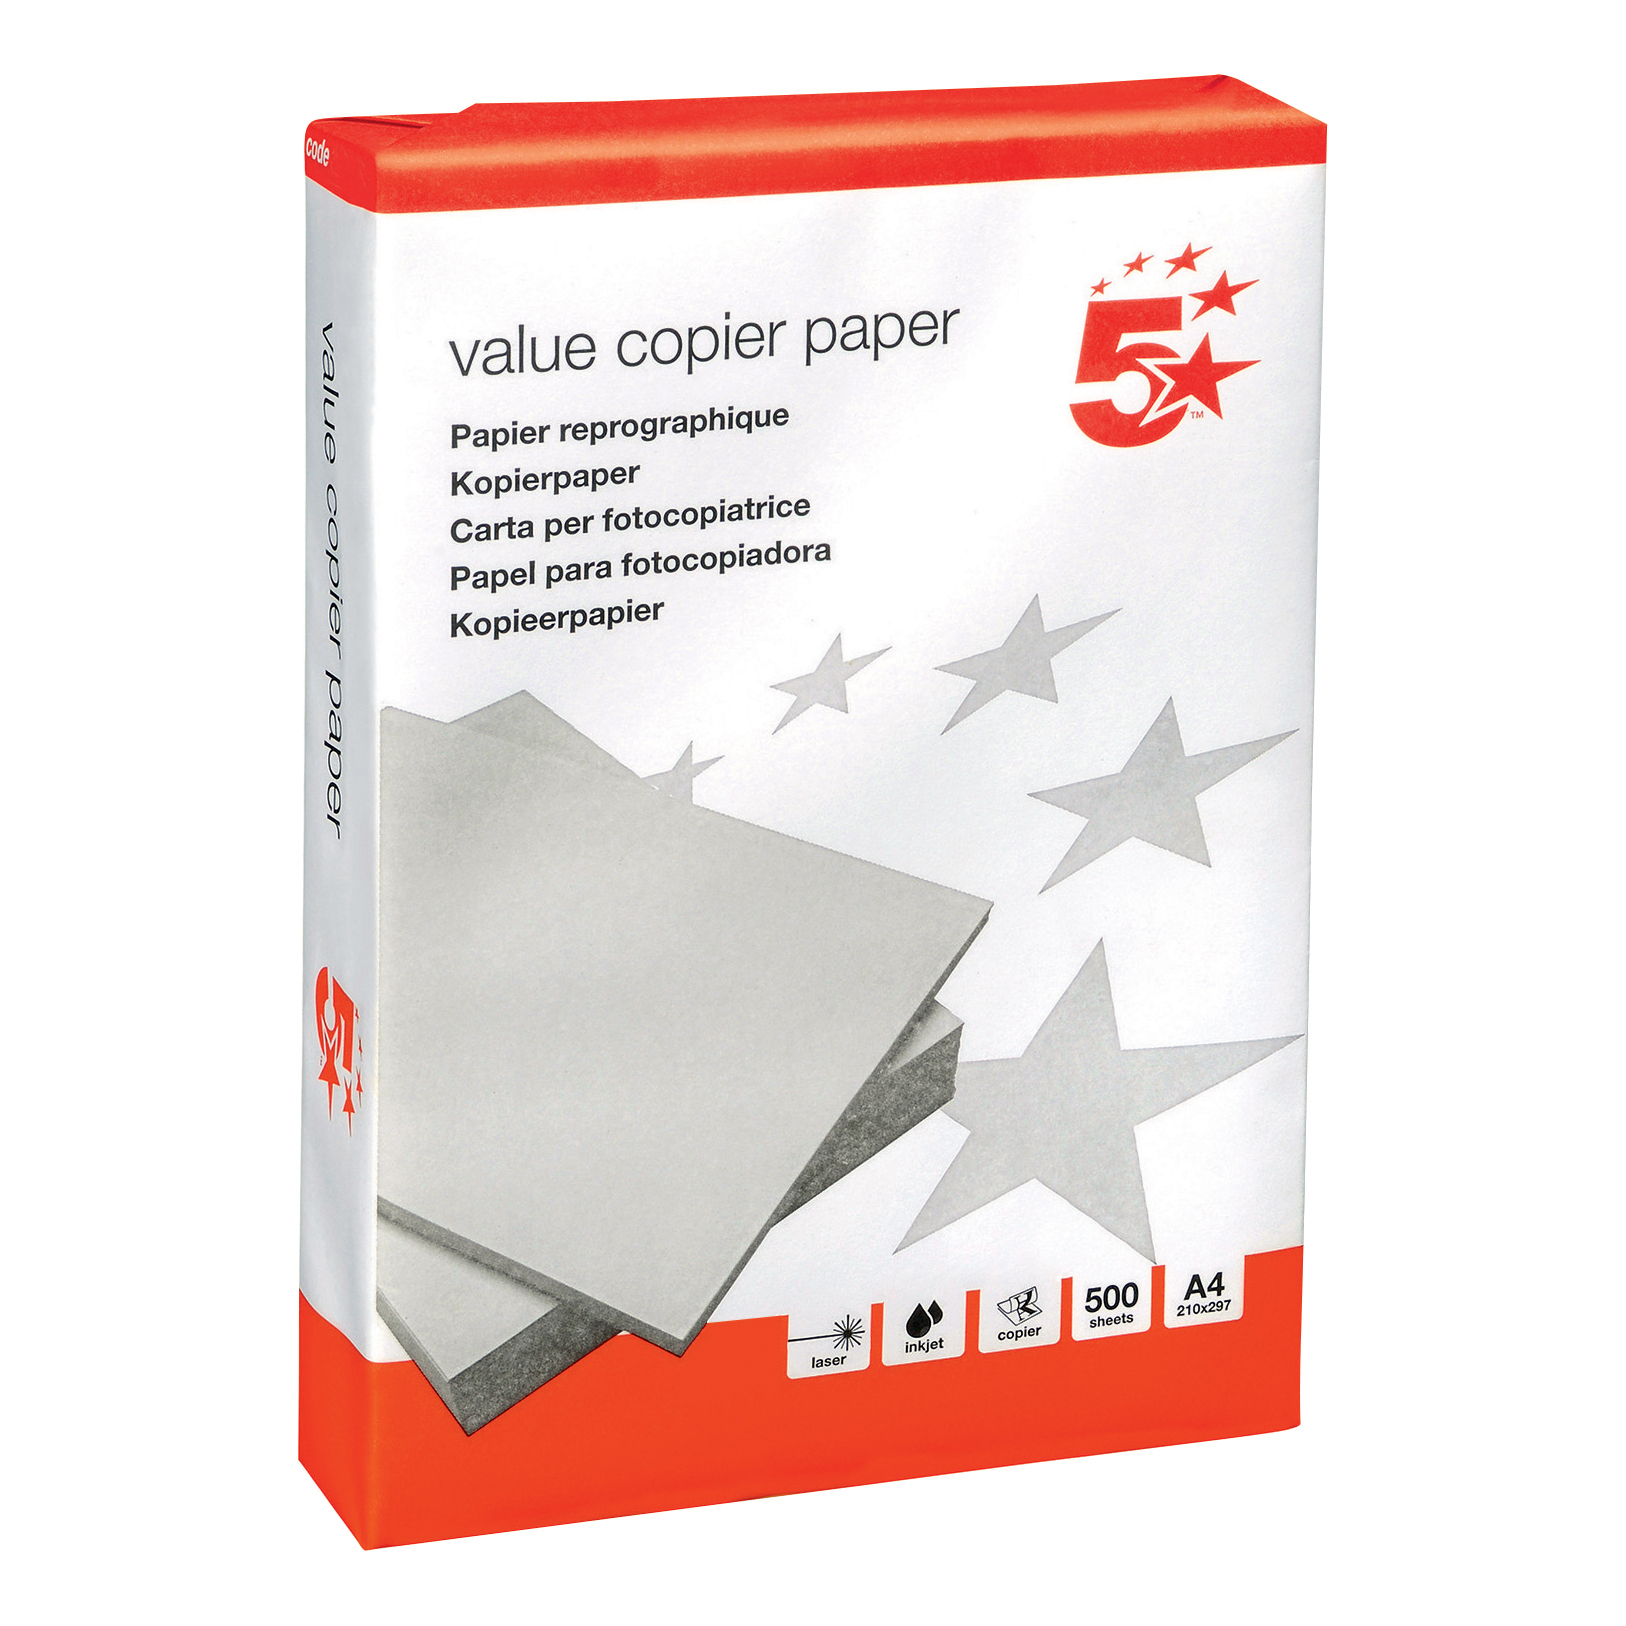 5 Star Office Value Copier Paper Multifunctional 500 Sheets per Ream A4 White